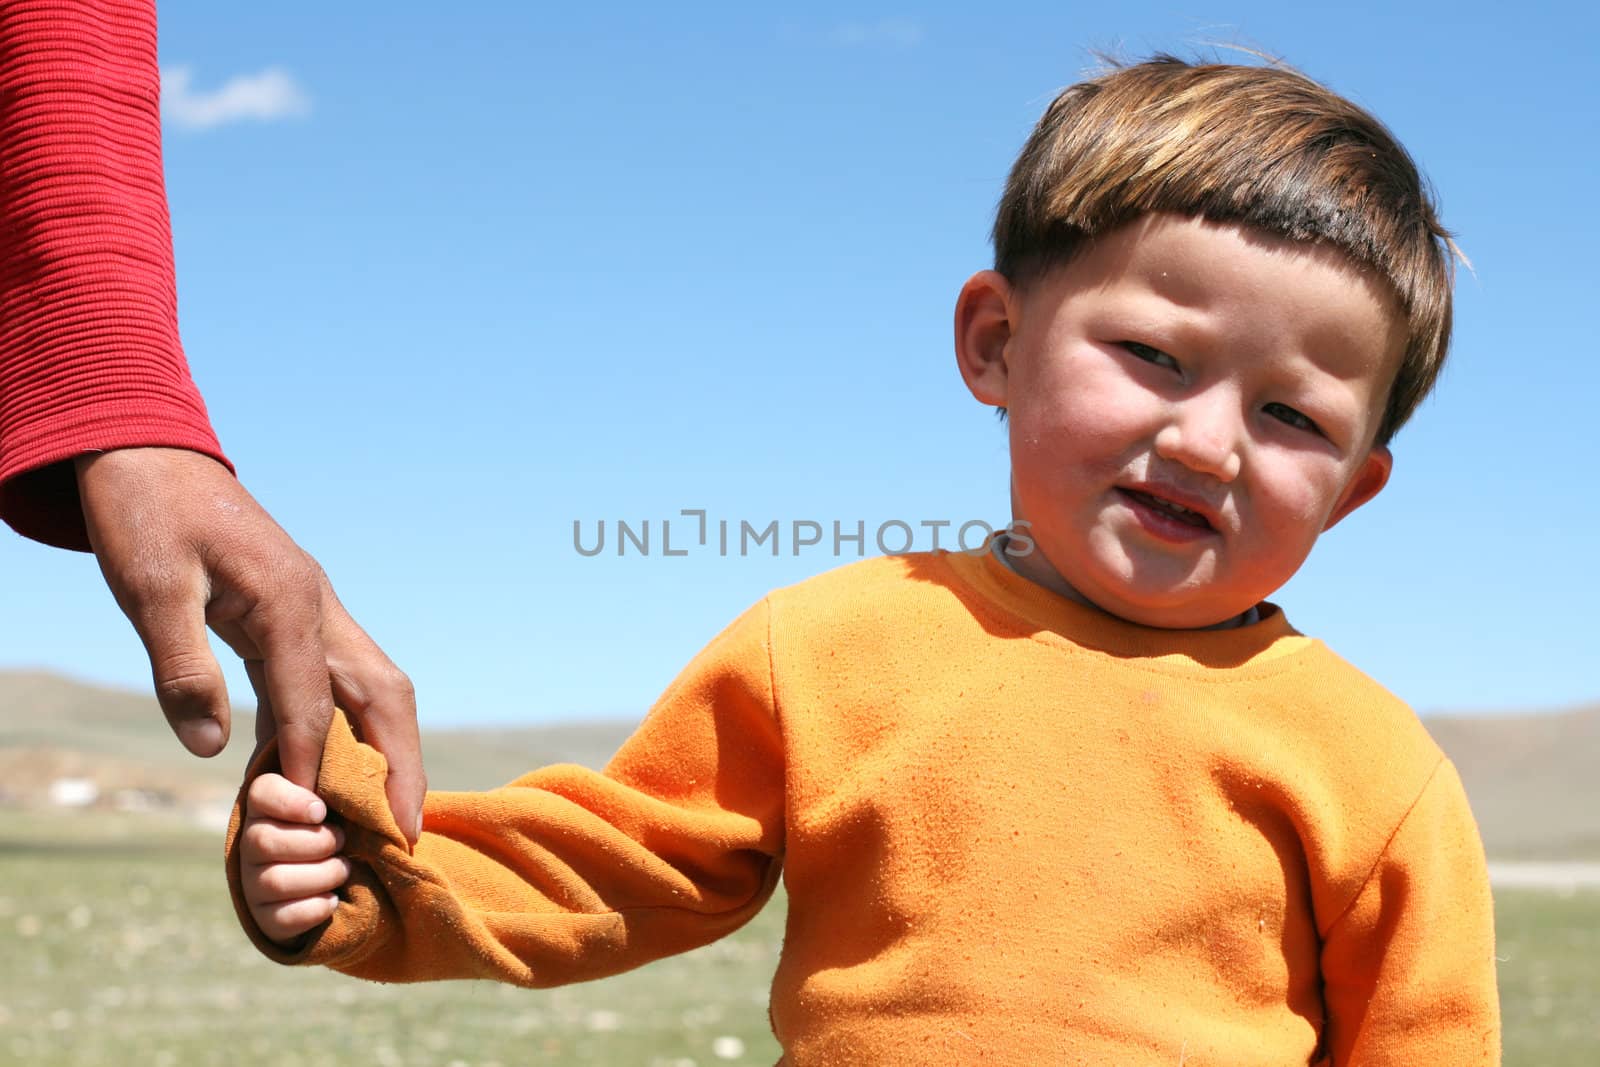 MONGOLIA, AUGUST 06, 2008 - mongolian boy keeping fathers by arm